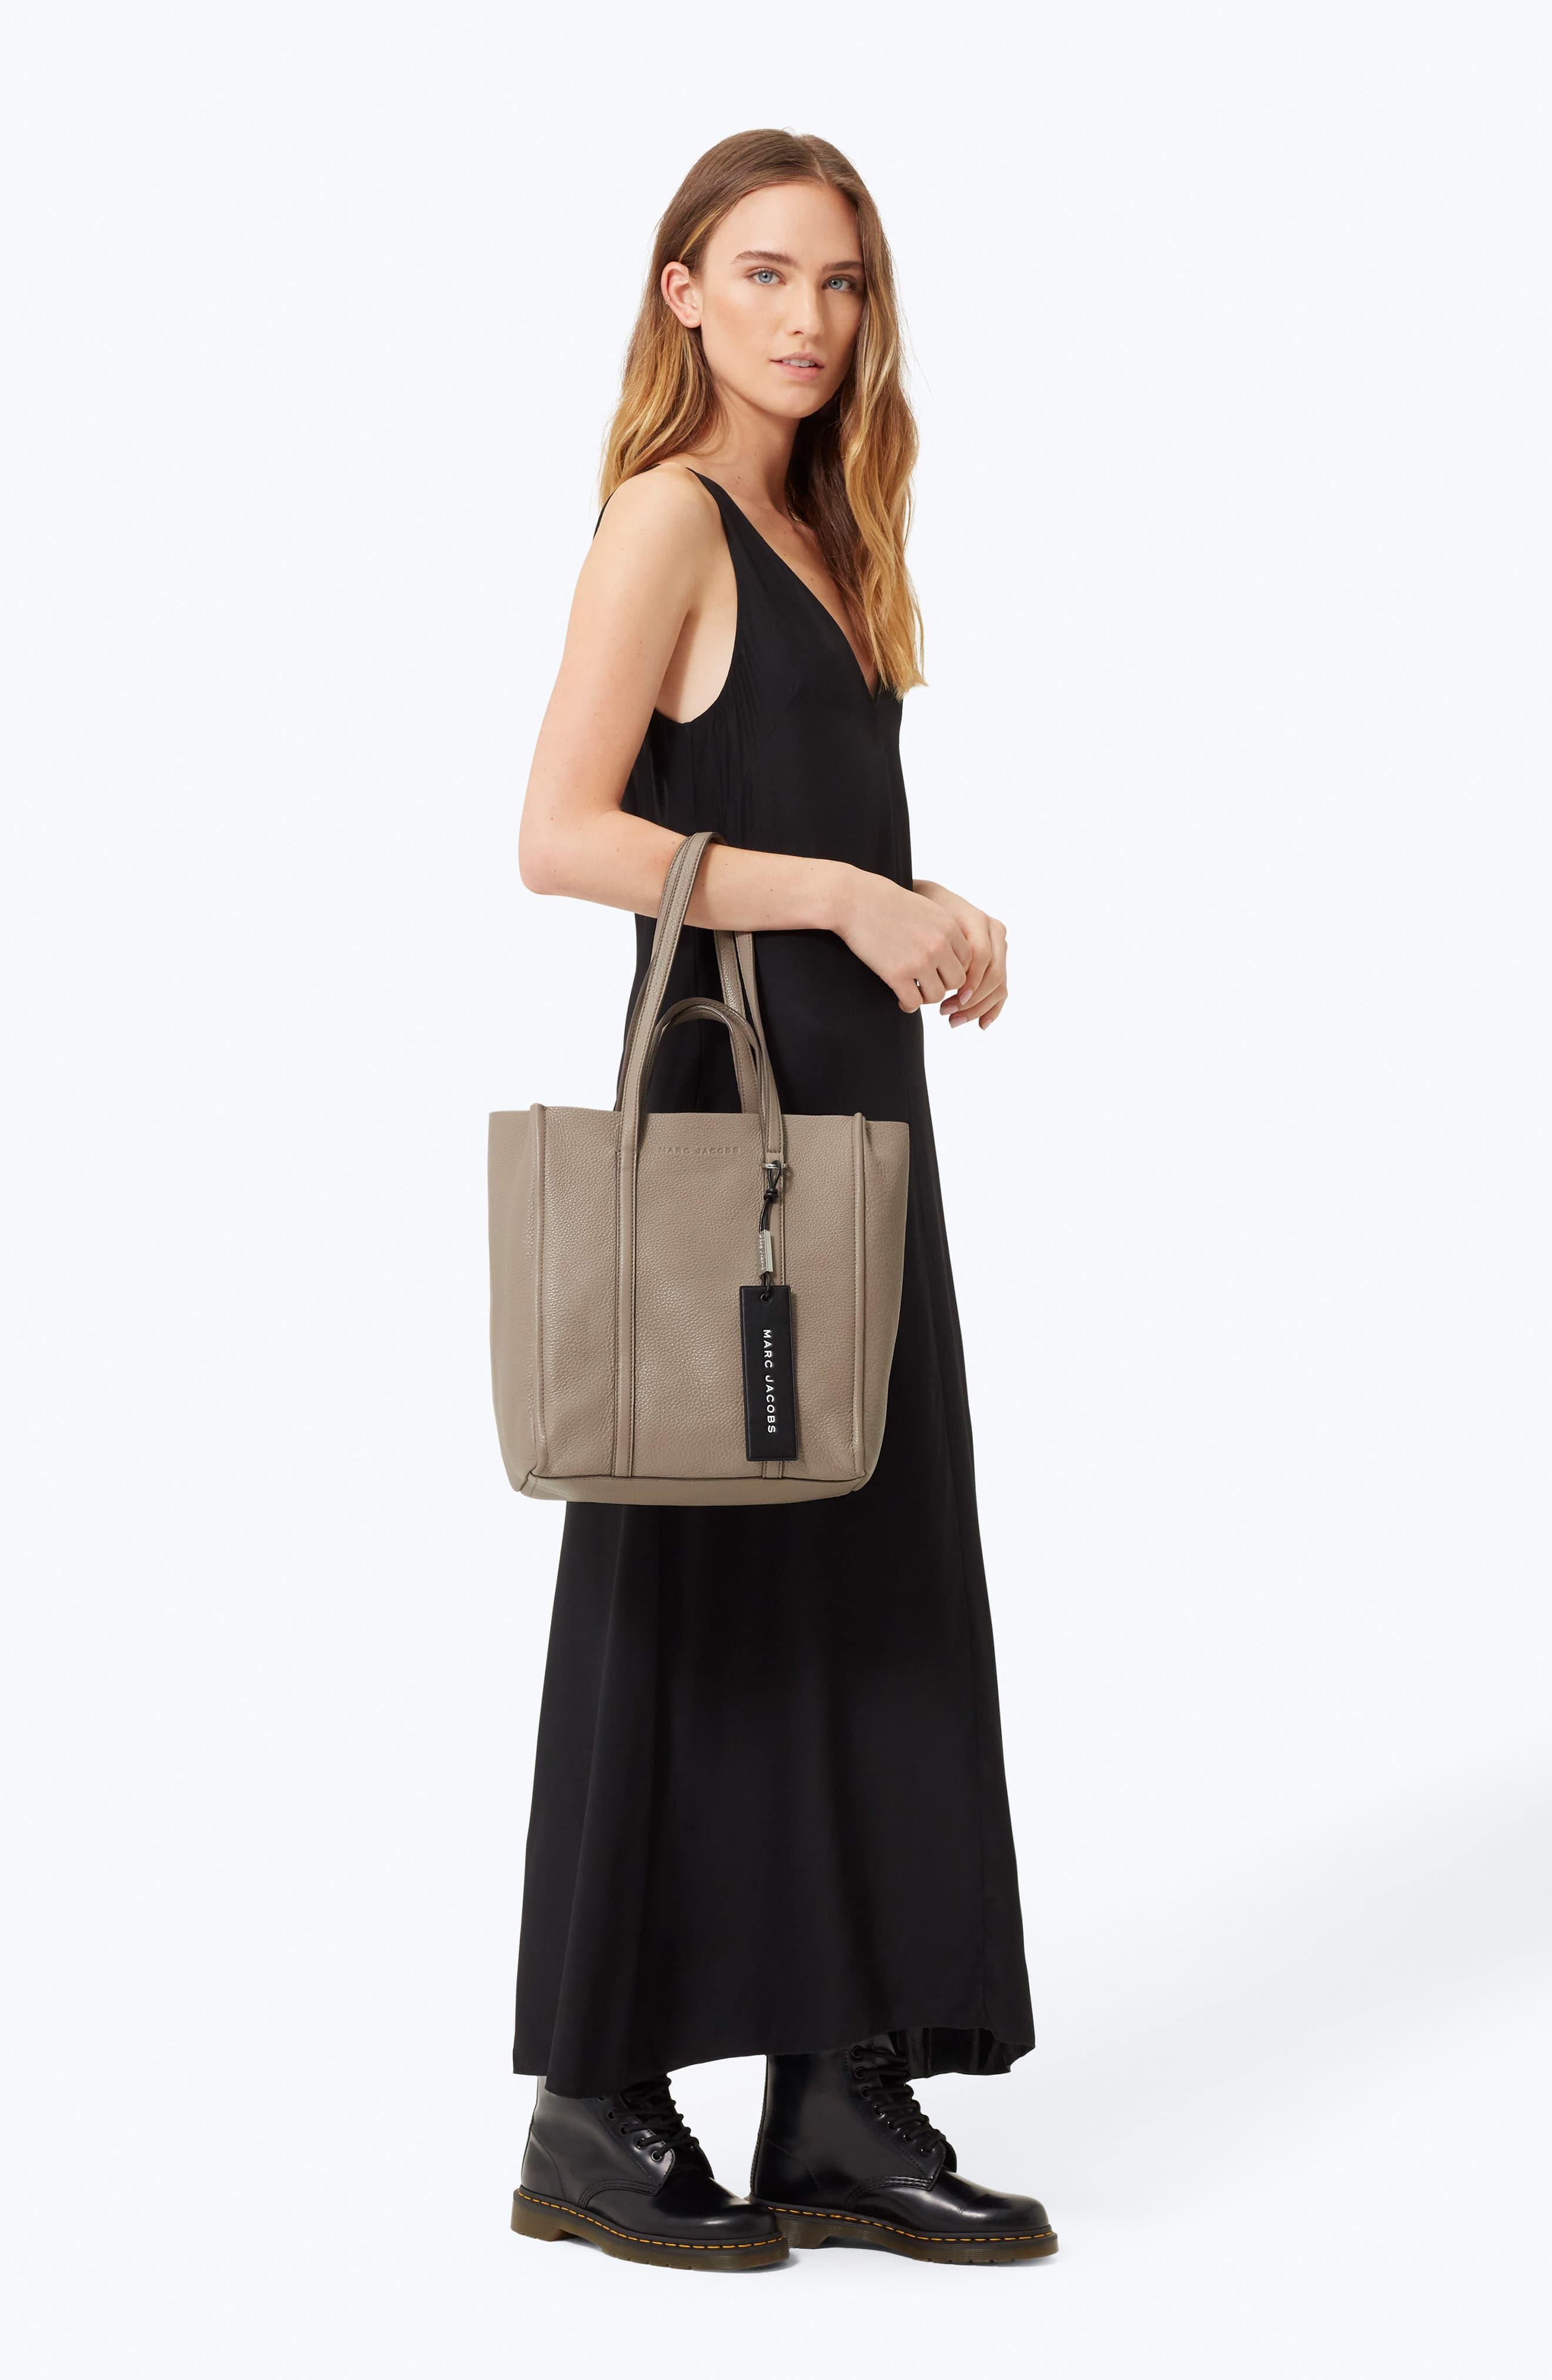 Marc Jacobs Tag Tote 27 Flash Sales, UP TO 70% OFF | container-custom.com